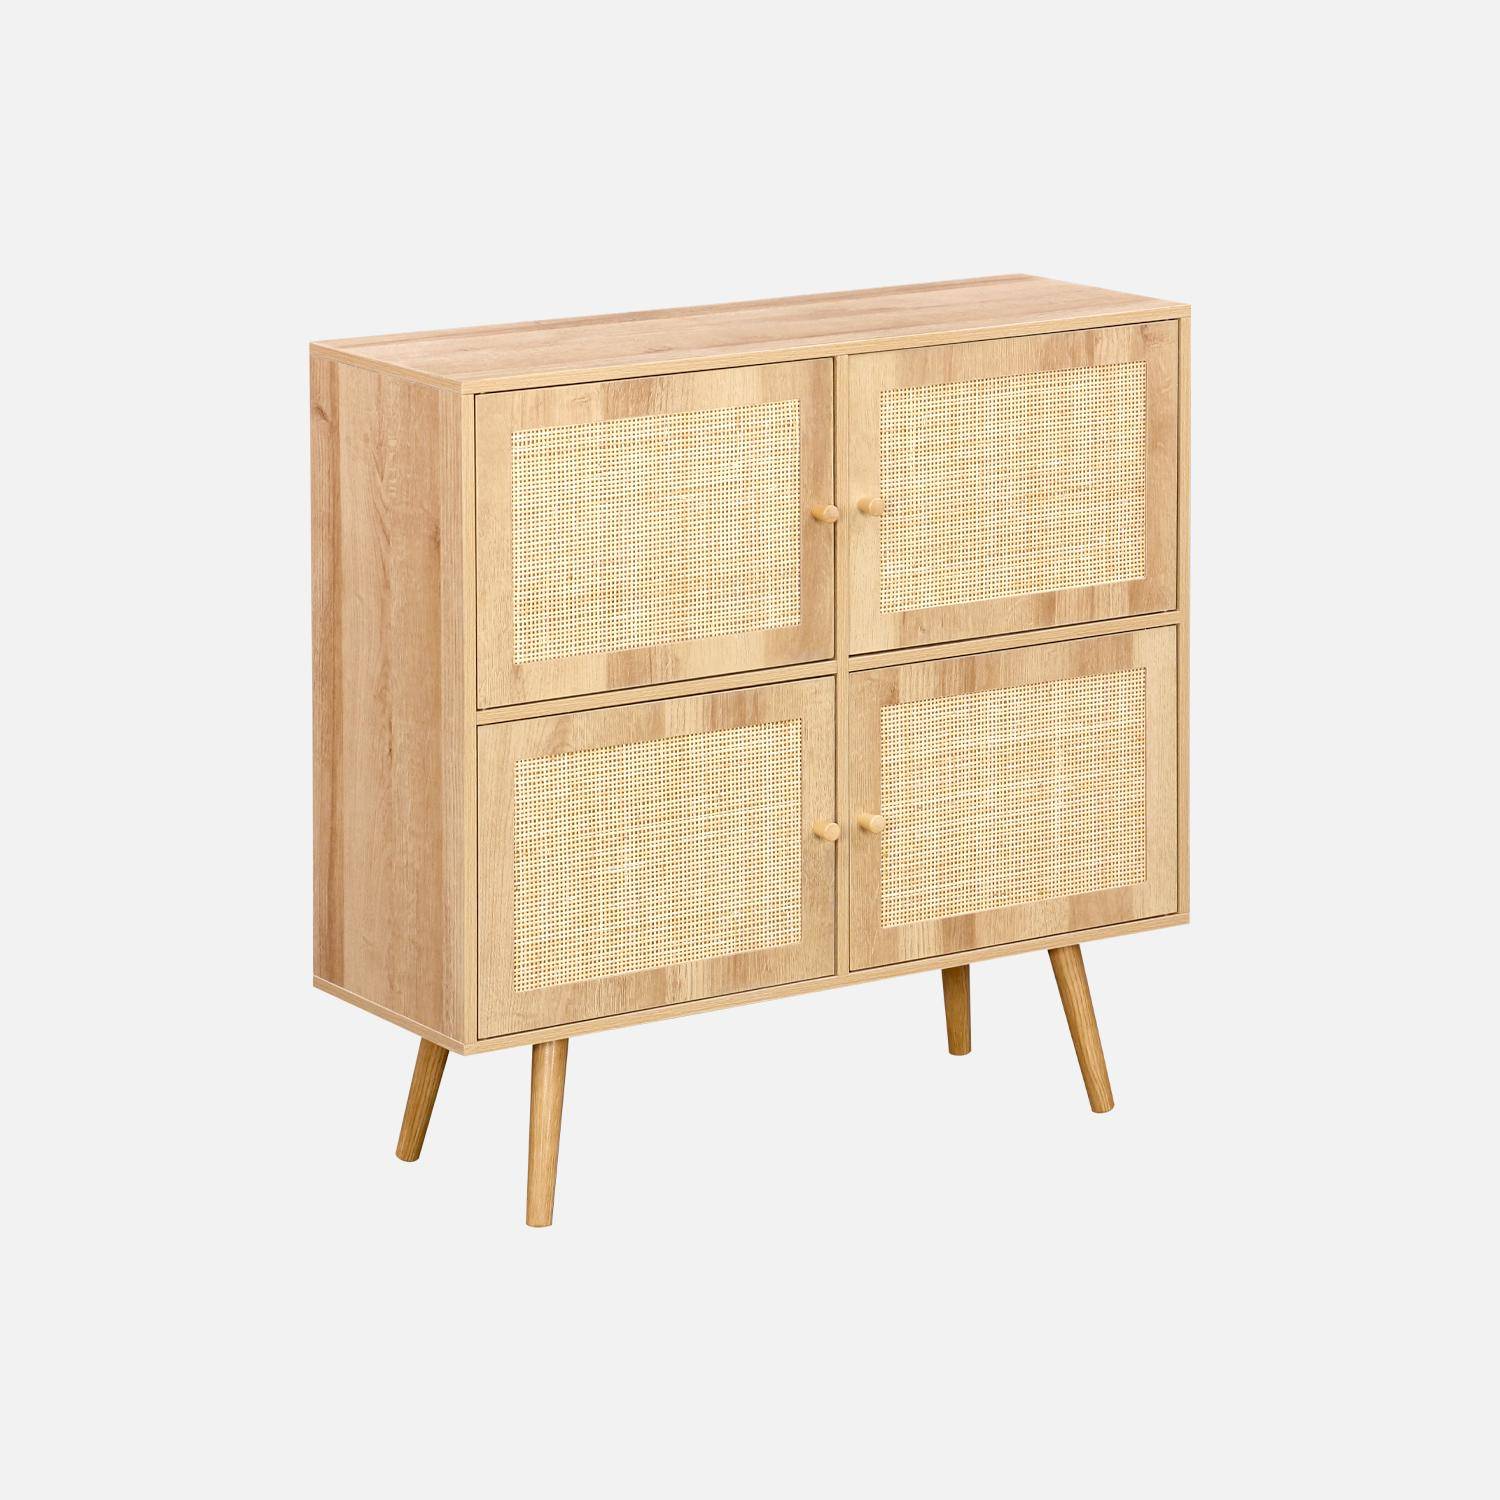 Wood-effect 4-door cane children's chest of drawers Photo1